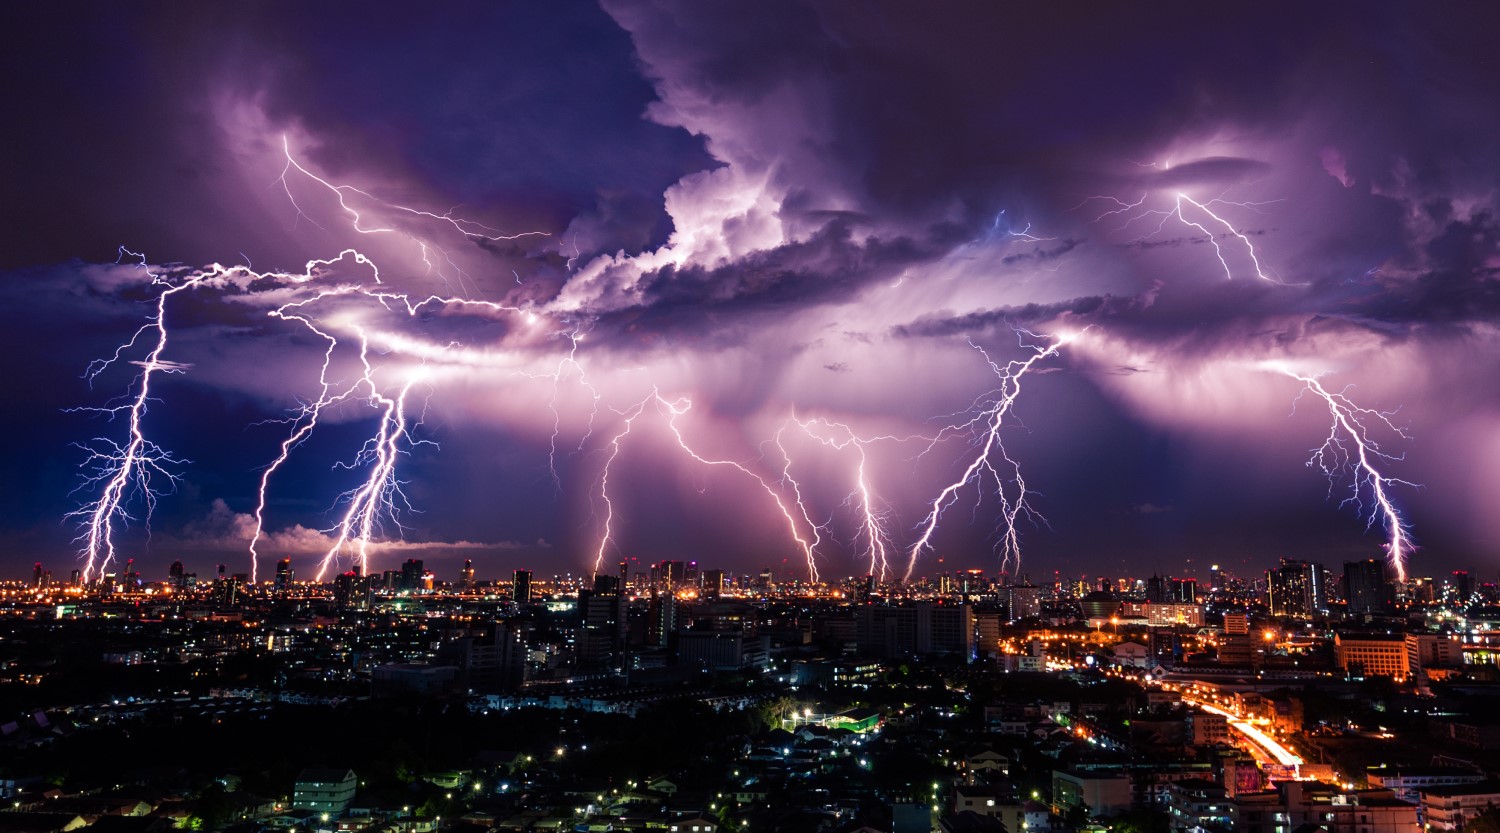 Bitcoin Startup Unveils ‘Thunder Bird’ Lightning Code For IoT Devices